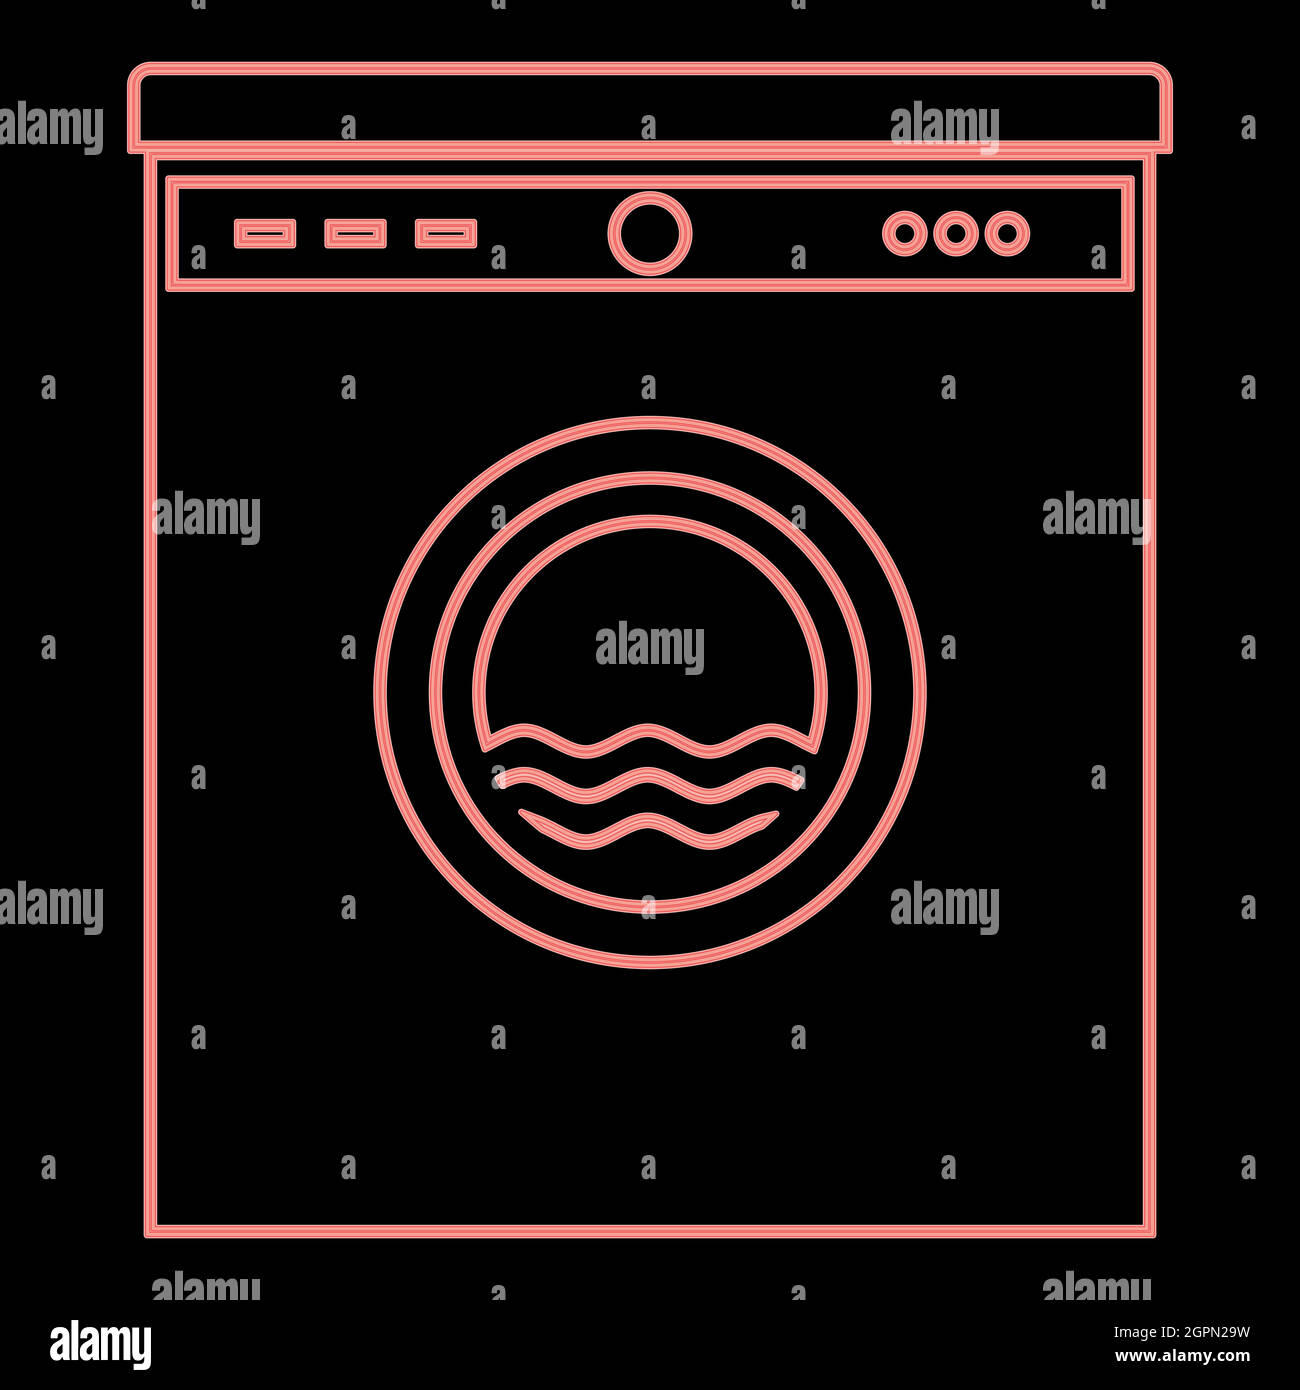 Neon washing machine the red color vector illustration flat style image Stock Vector